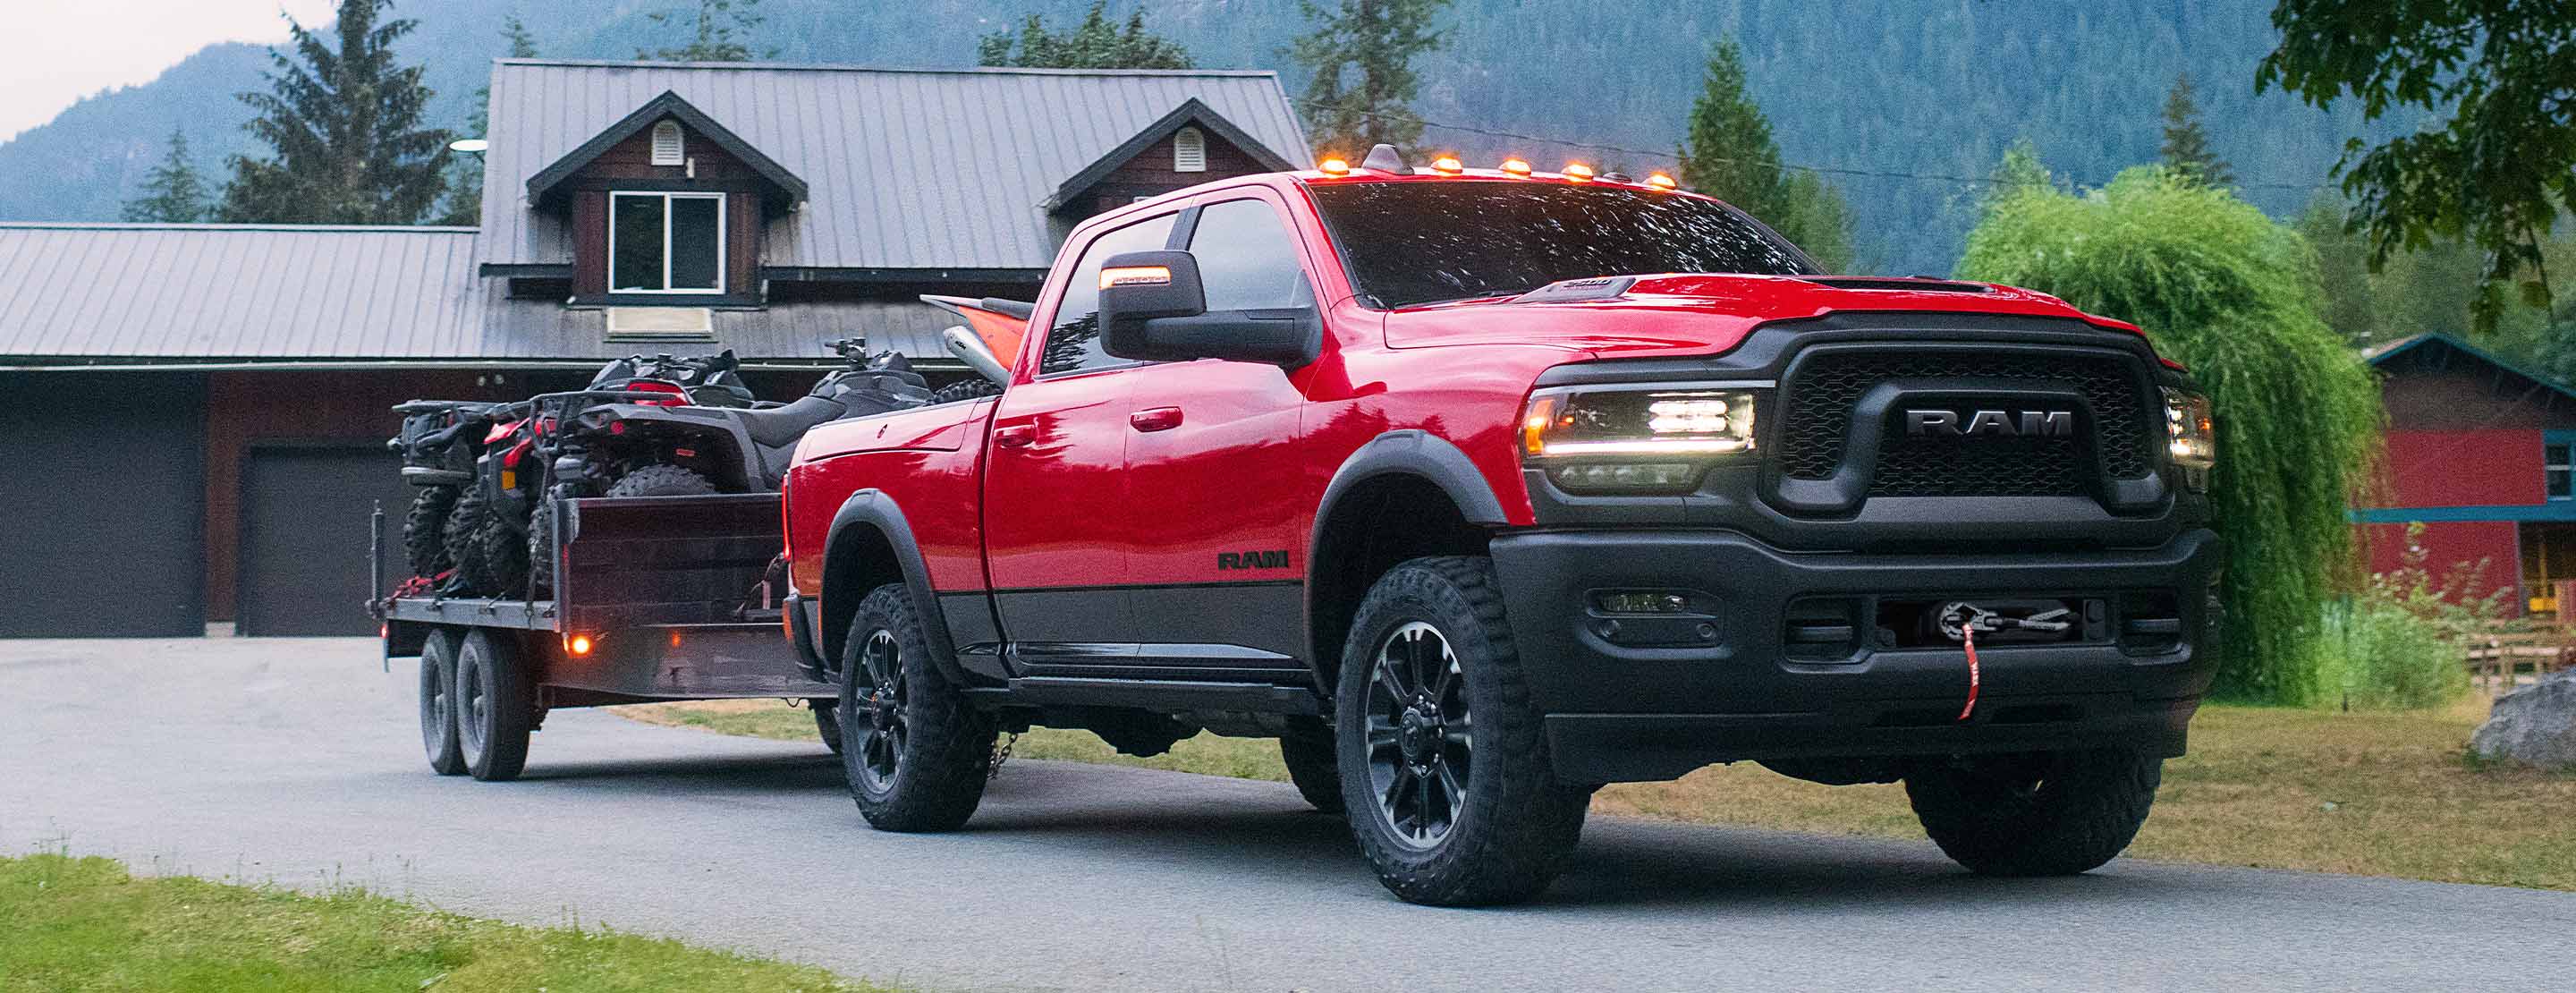 A red 2023 Ram 2500 Rebel parked in the driveway of a rural home with ATVs in tow on a flatbed trailer.